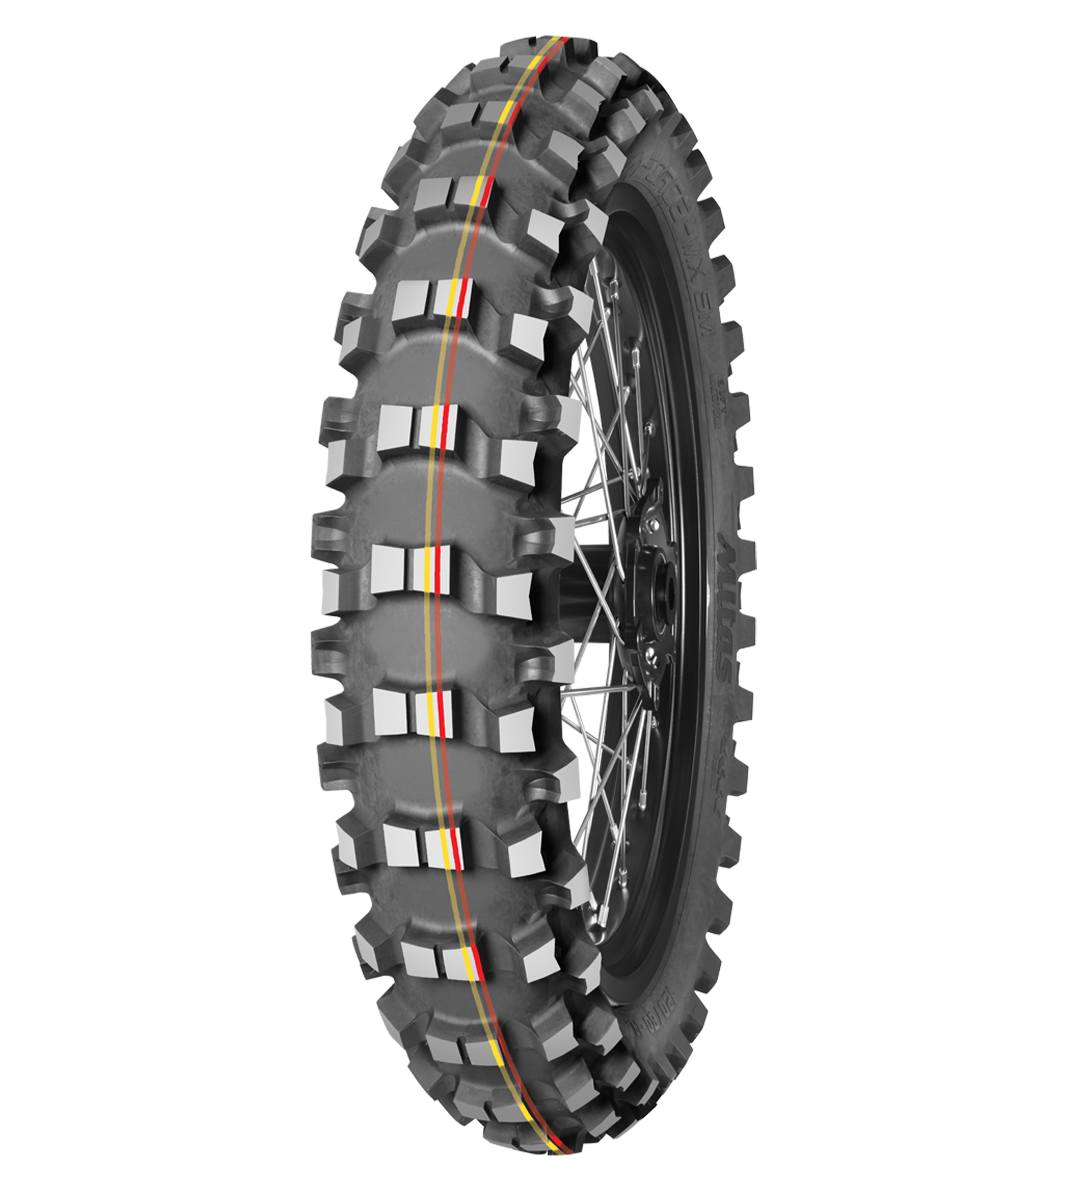 Mitas TERRA FORCE-MX SM 110/90-19 Motocross Competition Off-Road SOFT TO MEDIUM 62M Red & Yellow Tube Rear Tire, 226606, 110/90-19, Motocross, Motocross Competition, Off-Road, Rear, Terra Force, Terra Force-MX SM, Trail, Tires - Imported and distributed in North & South America by Lindeco Genuine Powersports - Premier Powersports Equipment and Accessories for Motorcycle Enthusiasts, Professional Riders and Dealers.